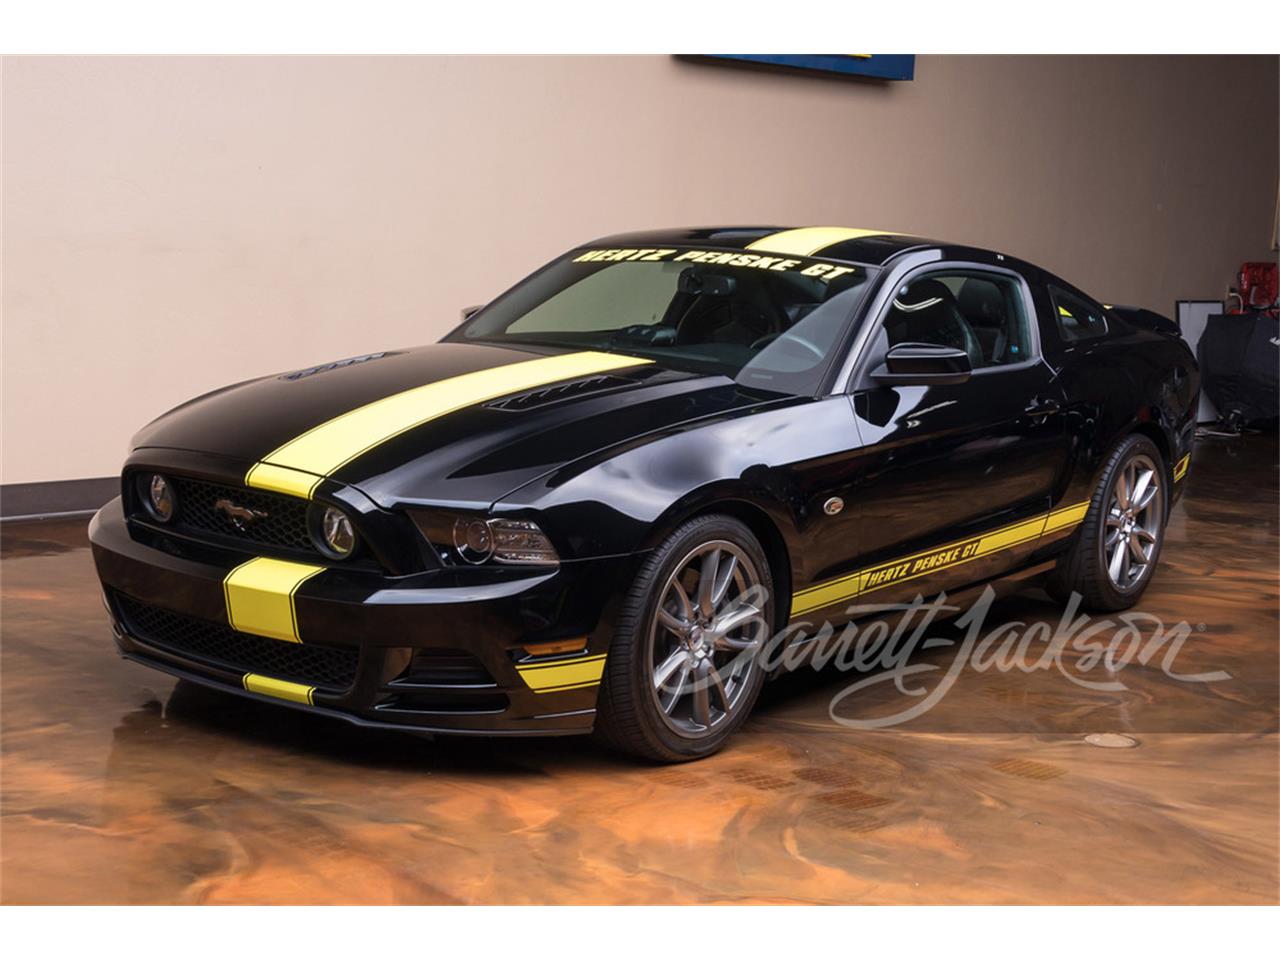 For Sale at Auction: 2014 Ford Mustang in Scottsdale, Arizona for sale in Scottsdale, AZ